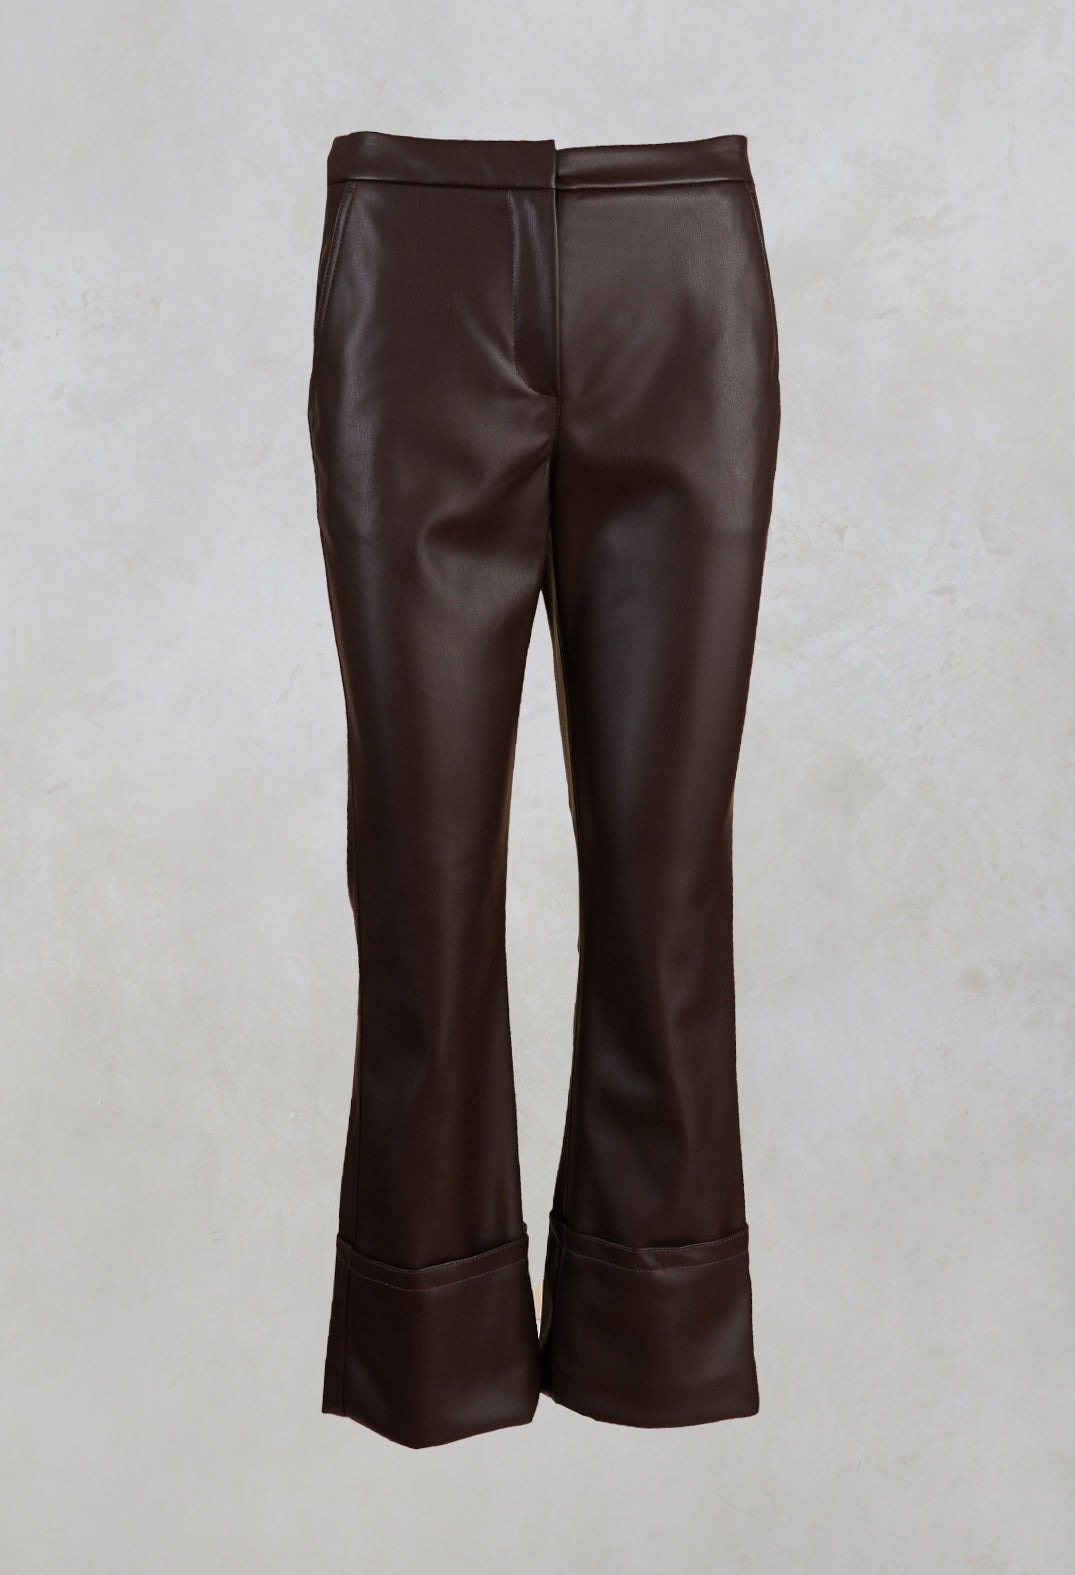 espresso brown leather trousers